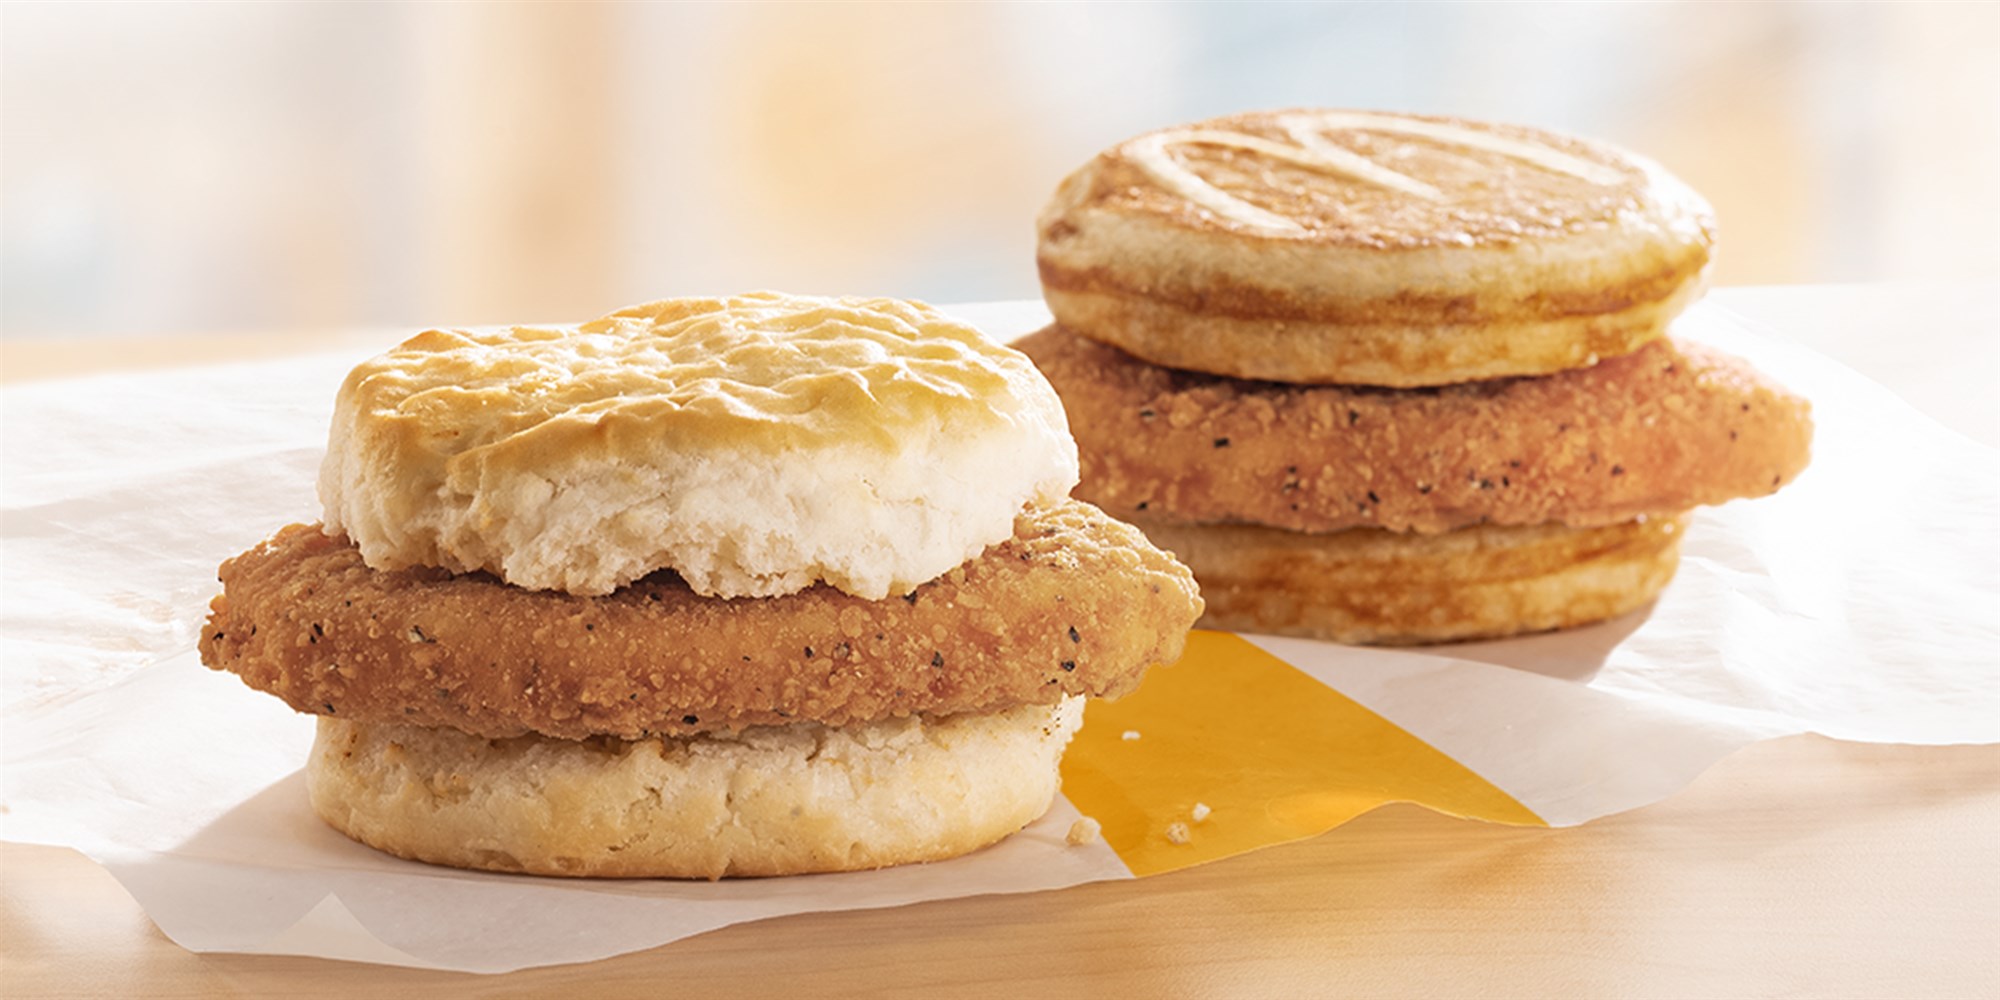 Watch Out, Chick-fil-A! McDonald’s Debuts 2 New Chicken Sandwiches